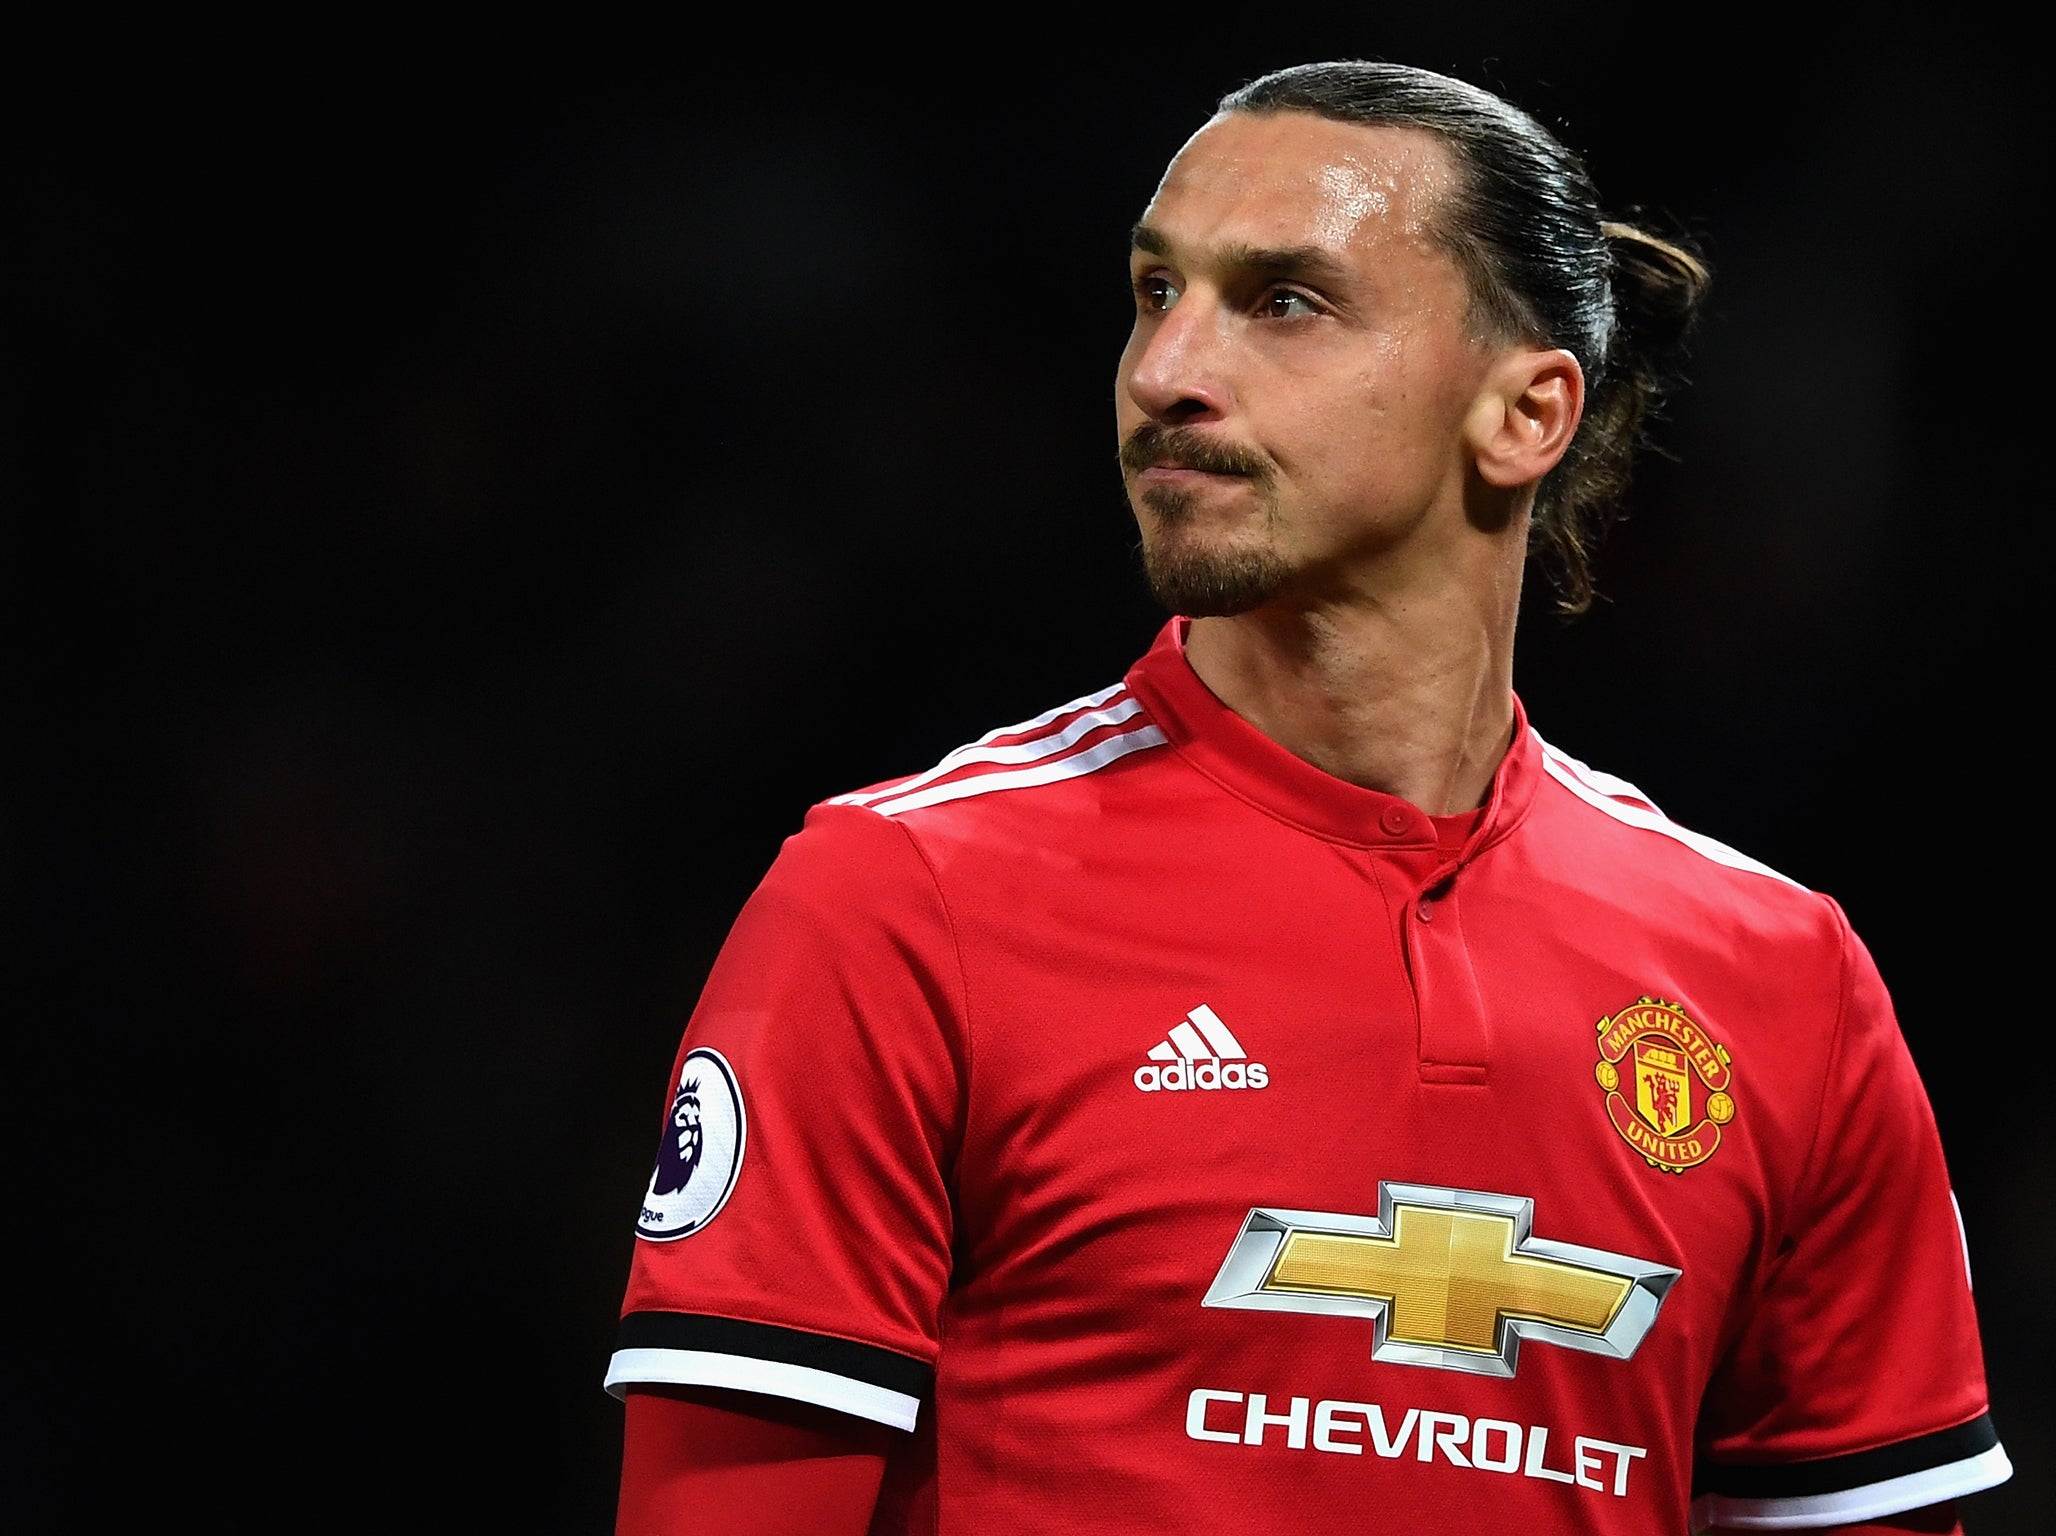  Zlatan Ibrahimovic  once again compares himself to a lion 